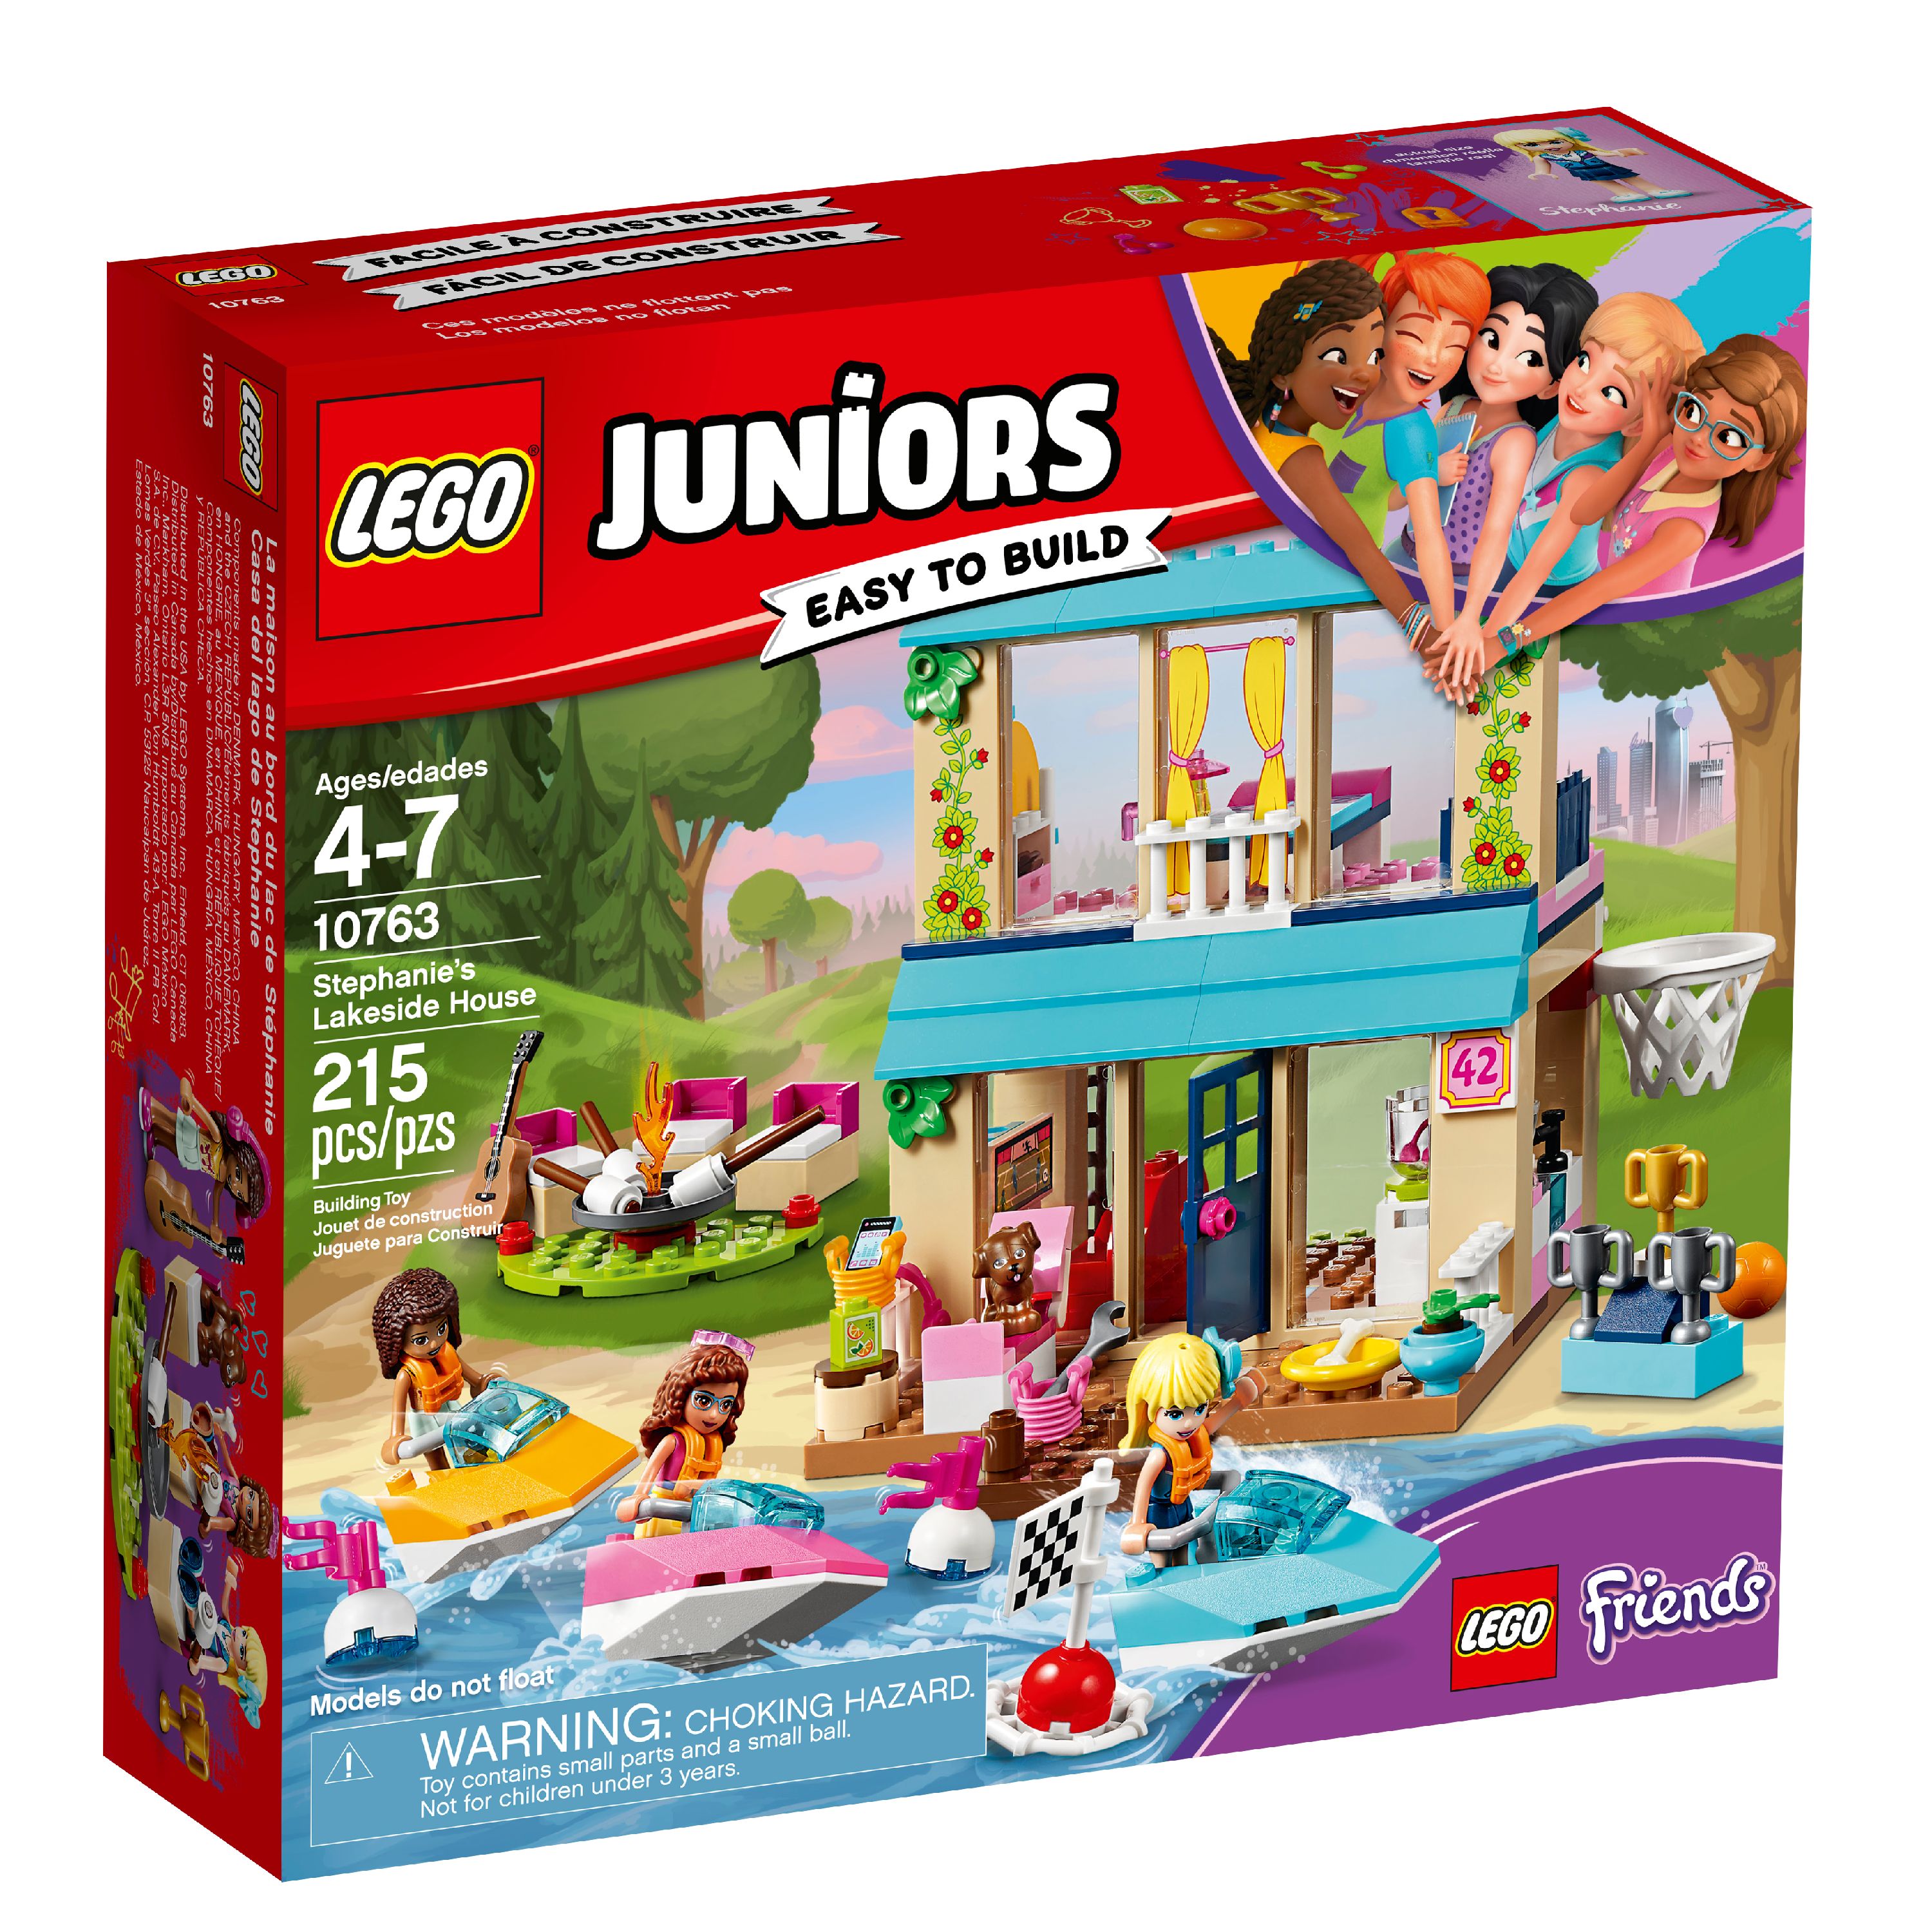 LEGO Juniors Stephanie's Lakeside House 10763 (215 Pieces) - image 2 of 6